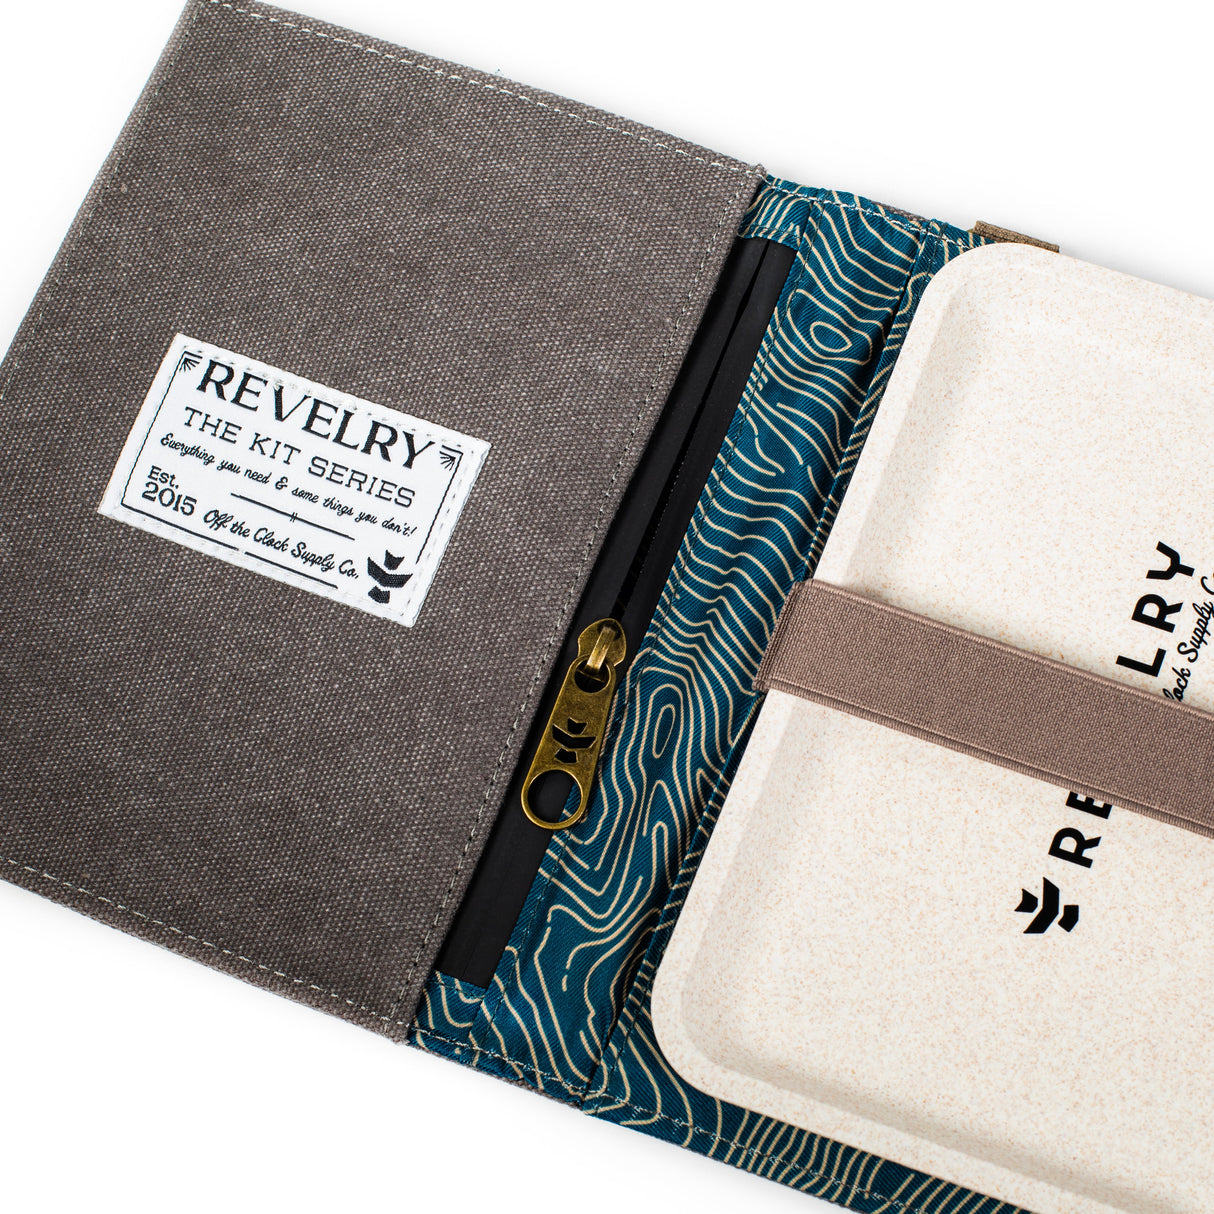 Revelry Supply The Rolling Kit open view showing smell proof compartments and sleek design